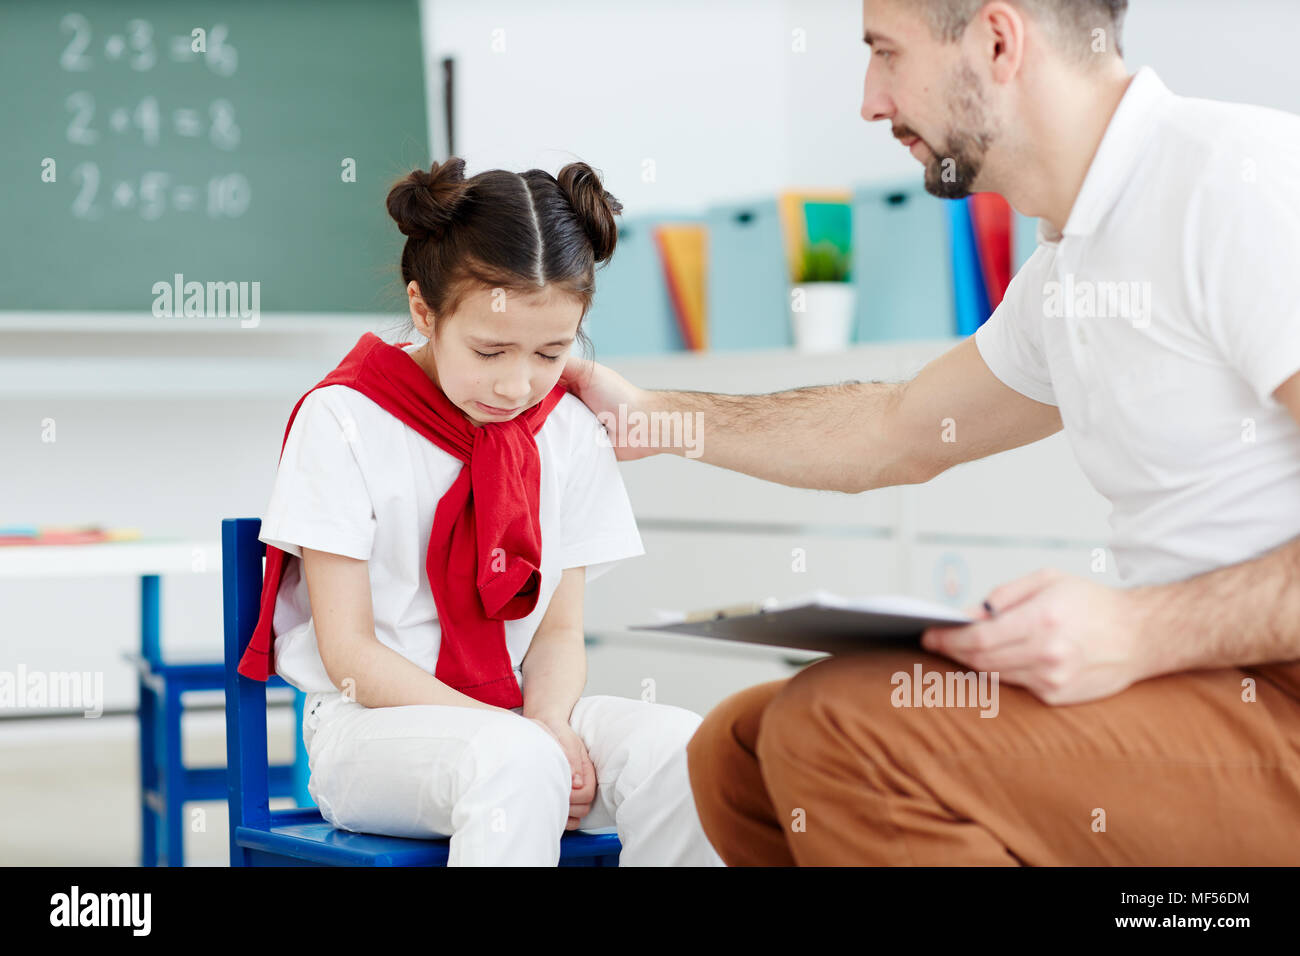 Pretty little girl sitting in classroom and crying because of bad mark while professional male teacher comforting her Stock Photo